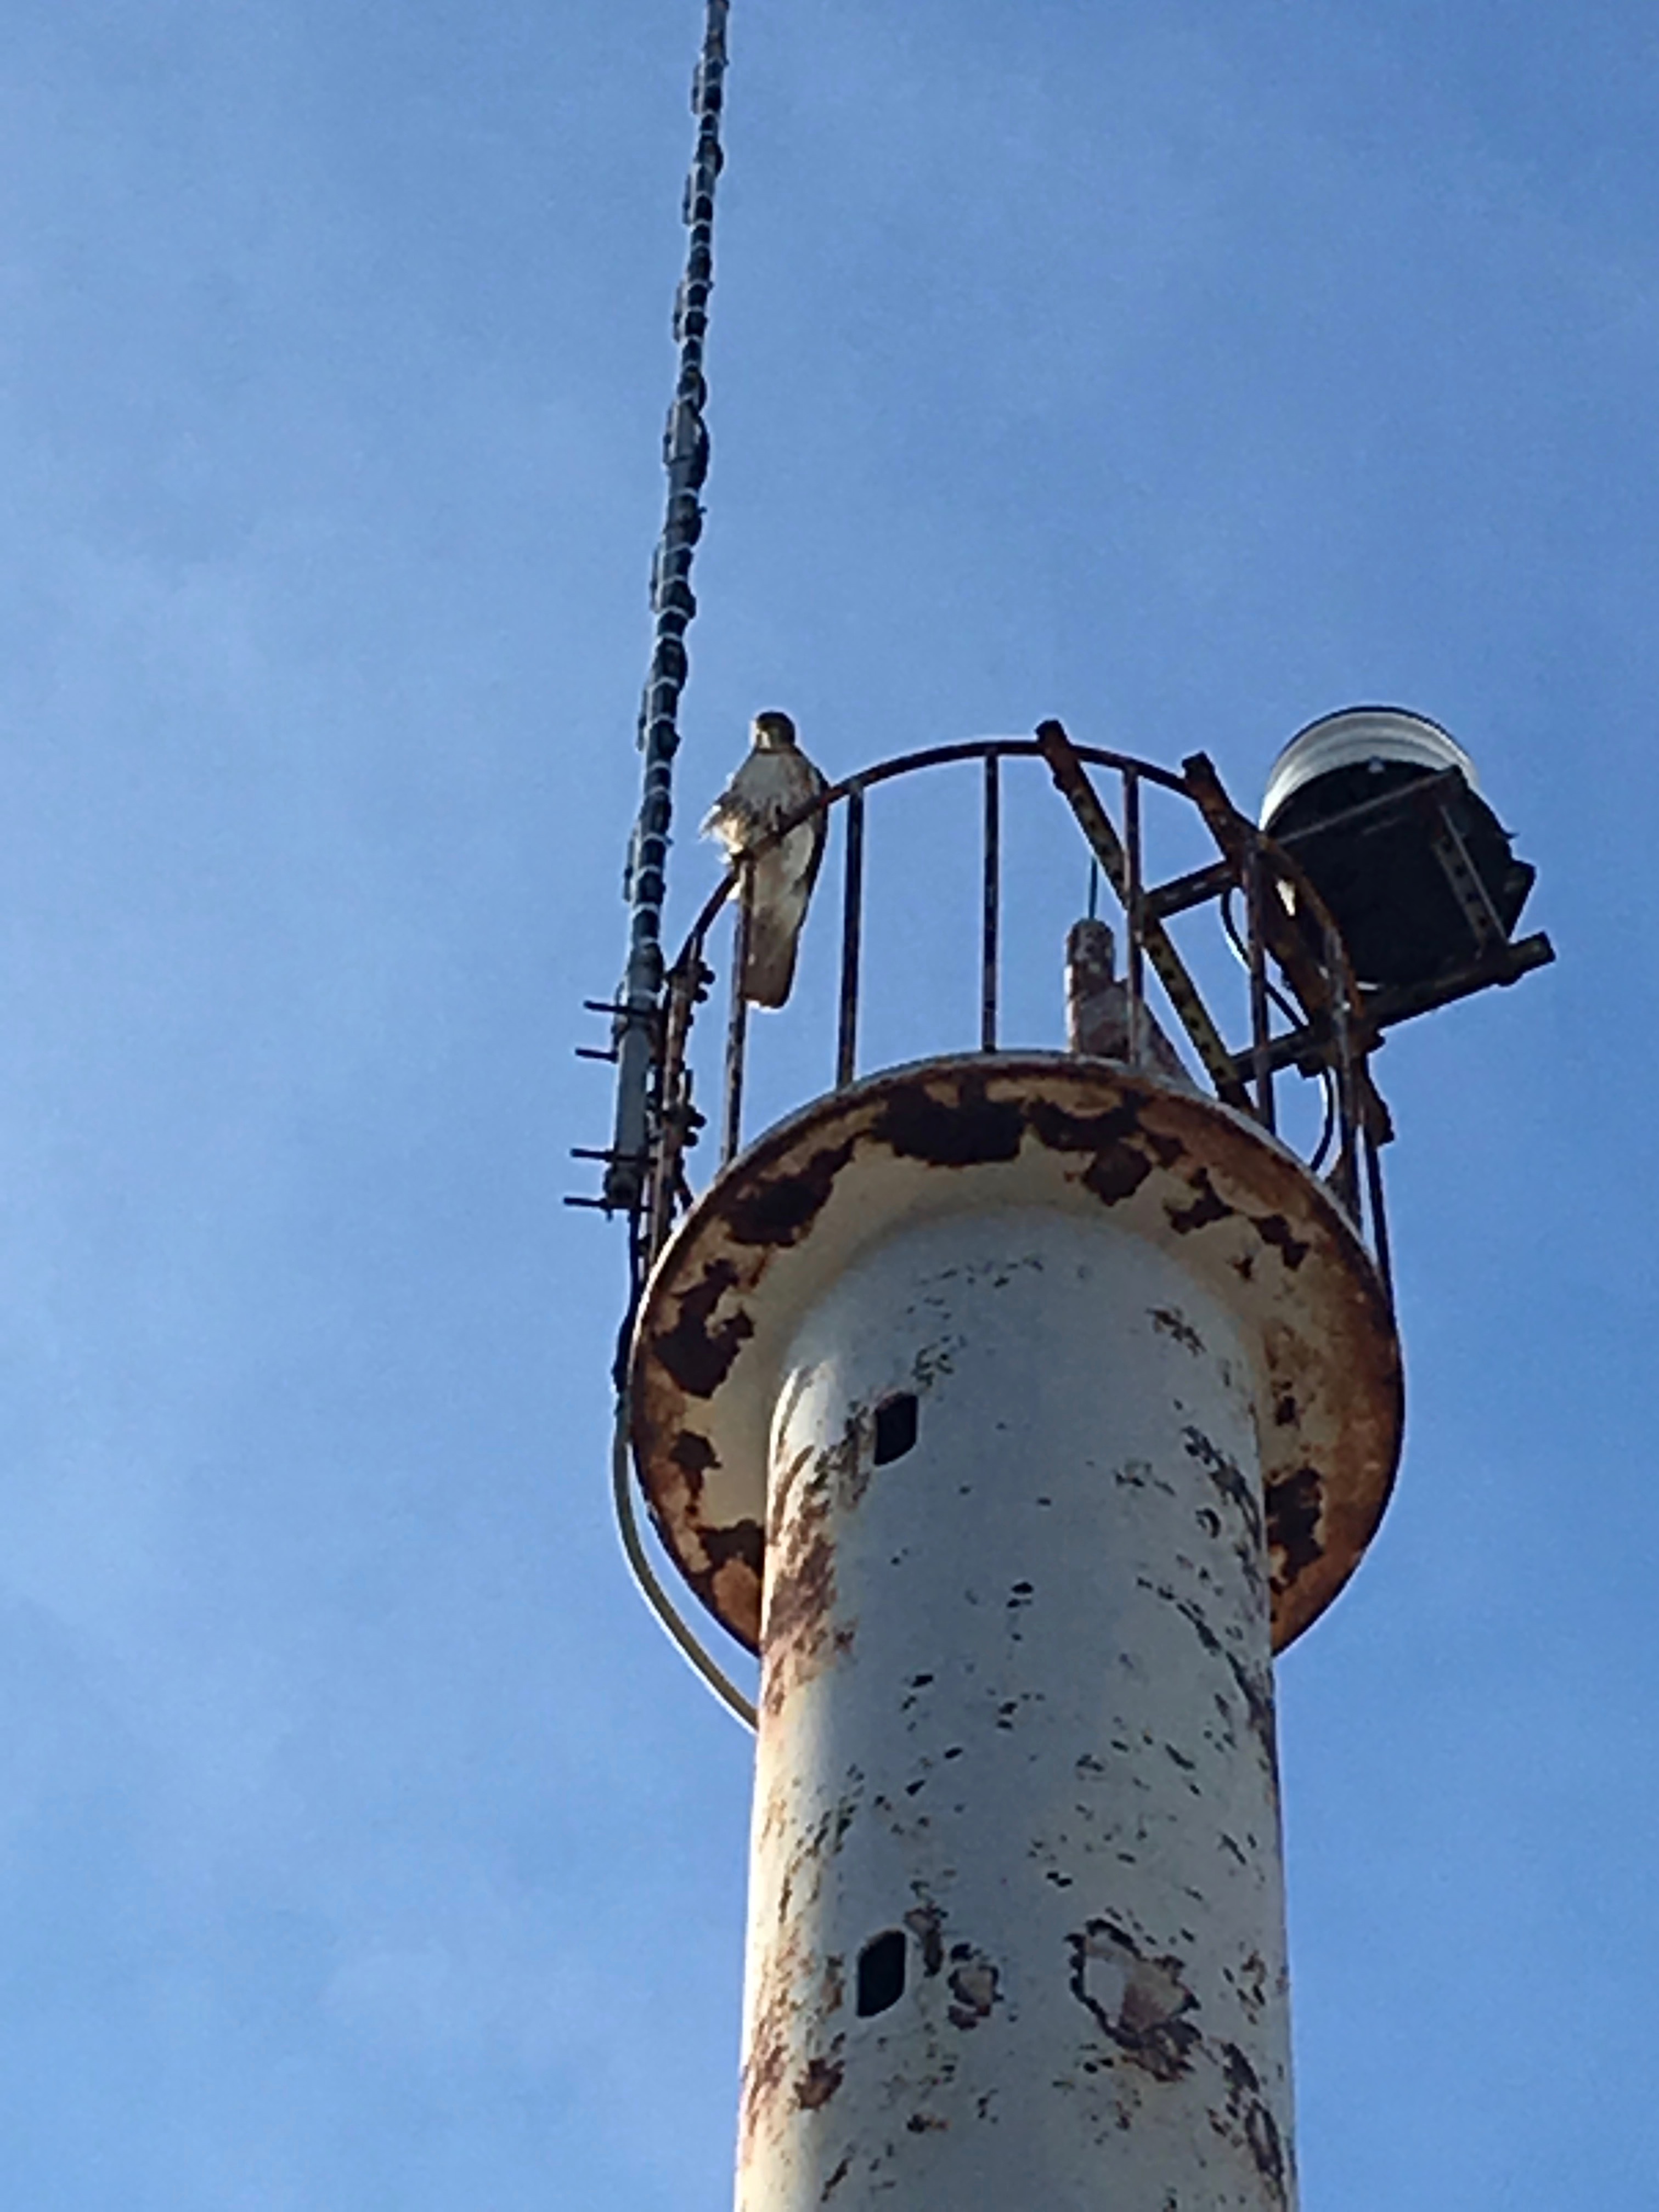 Repeater antenna on crow's nest